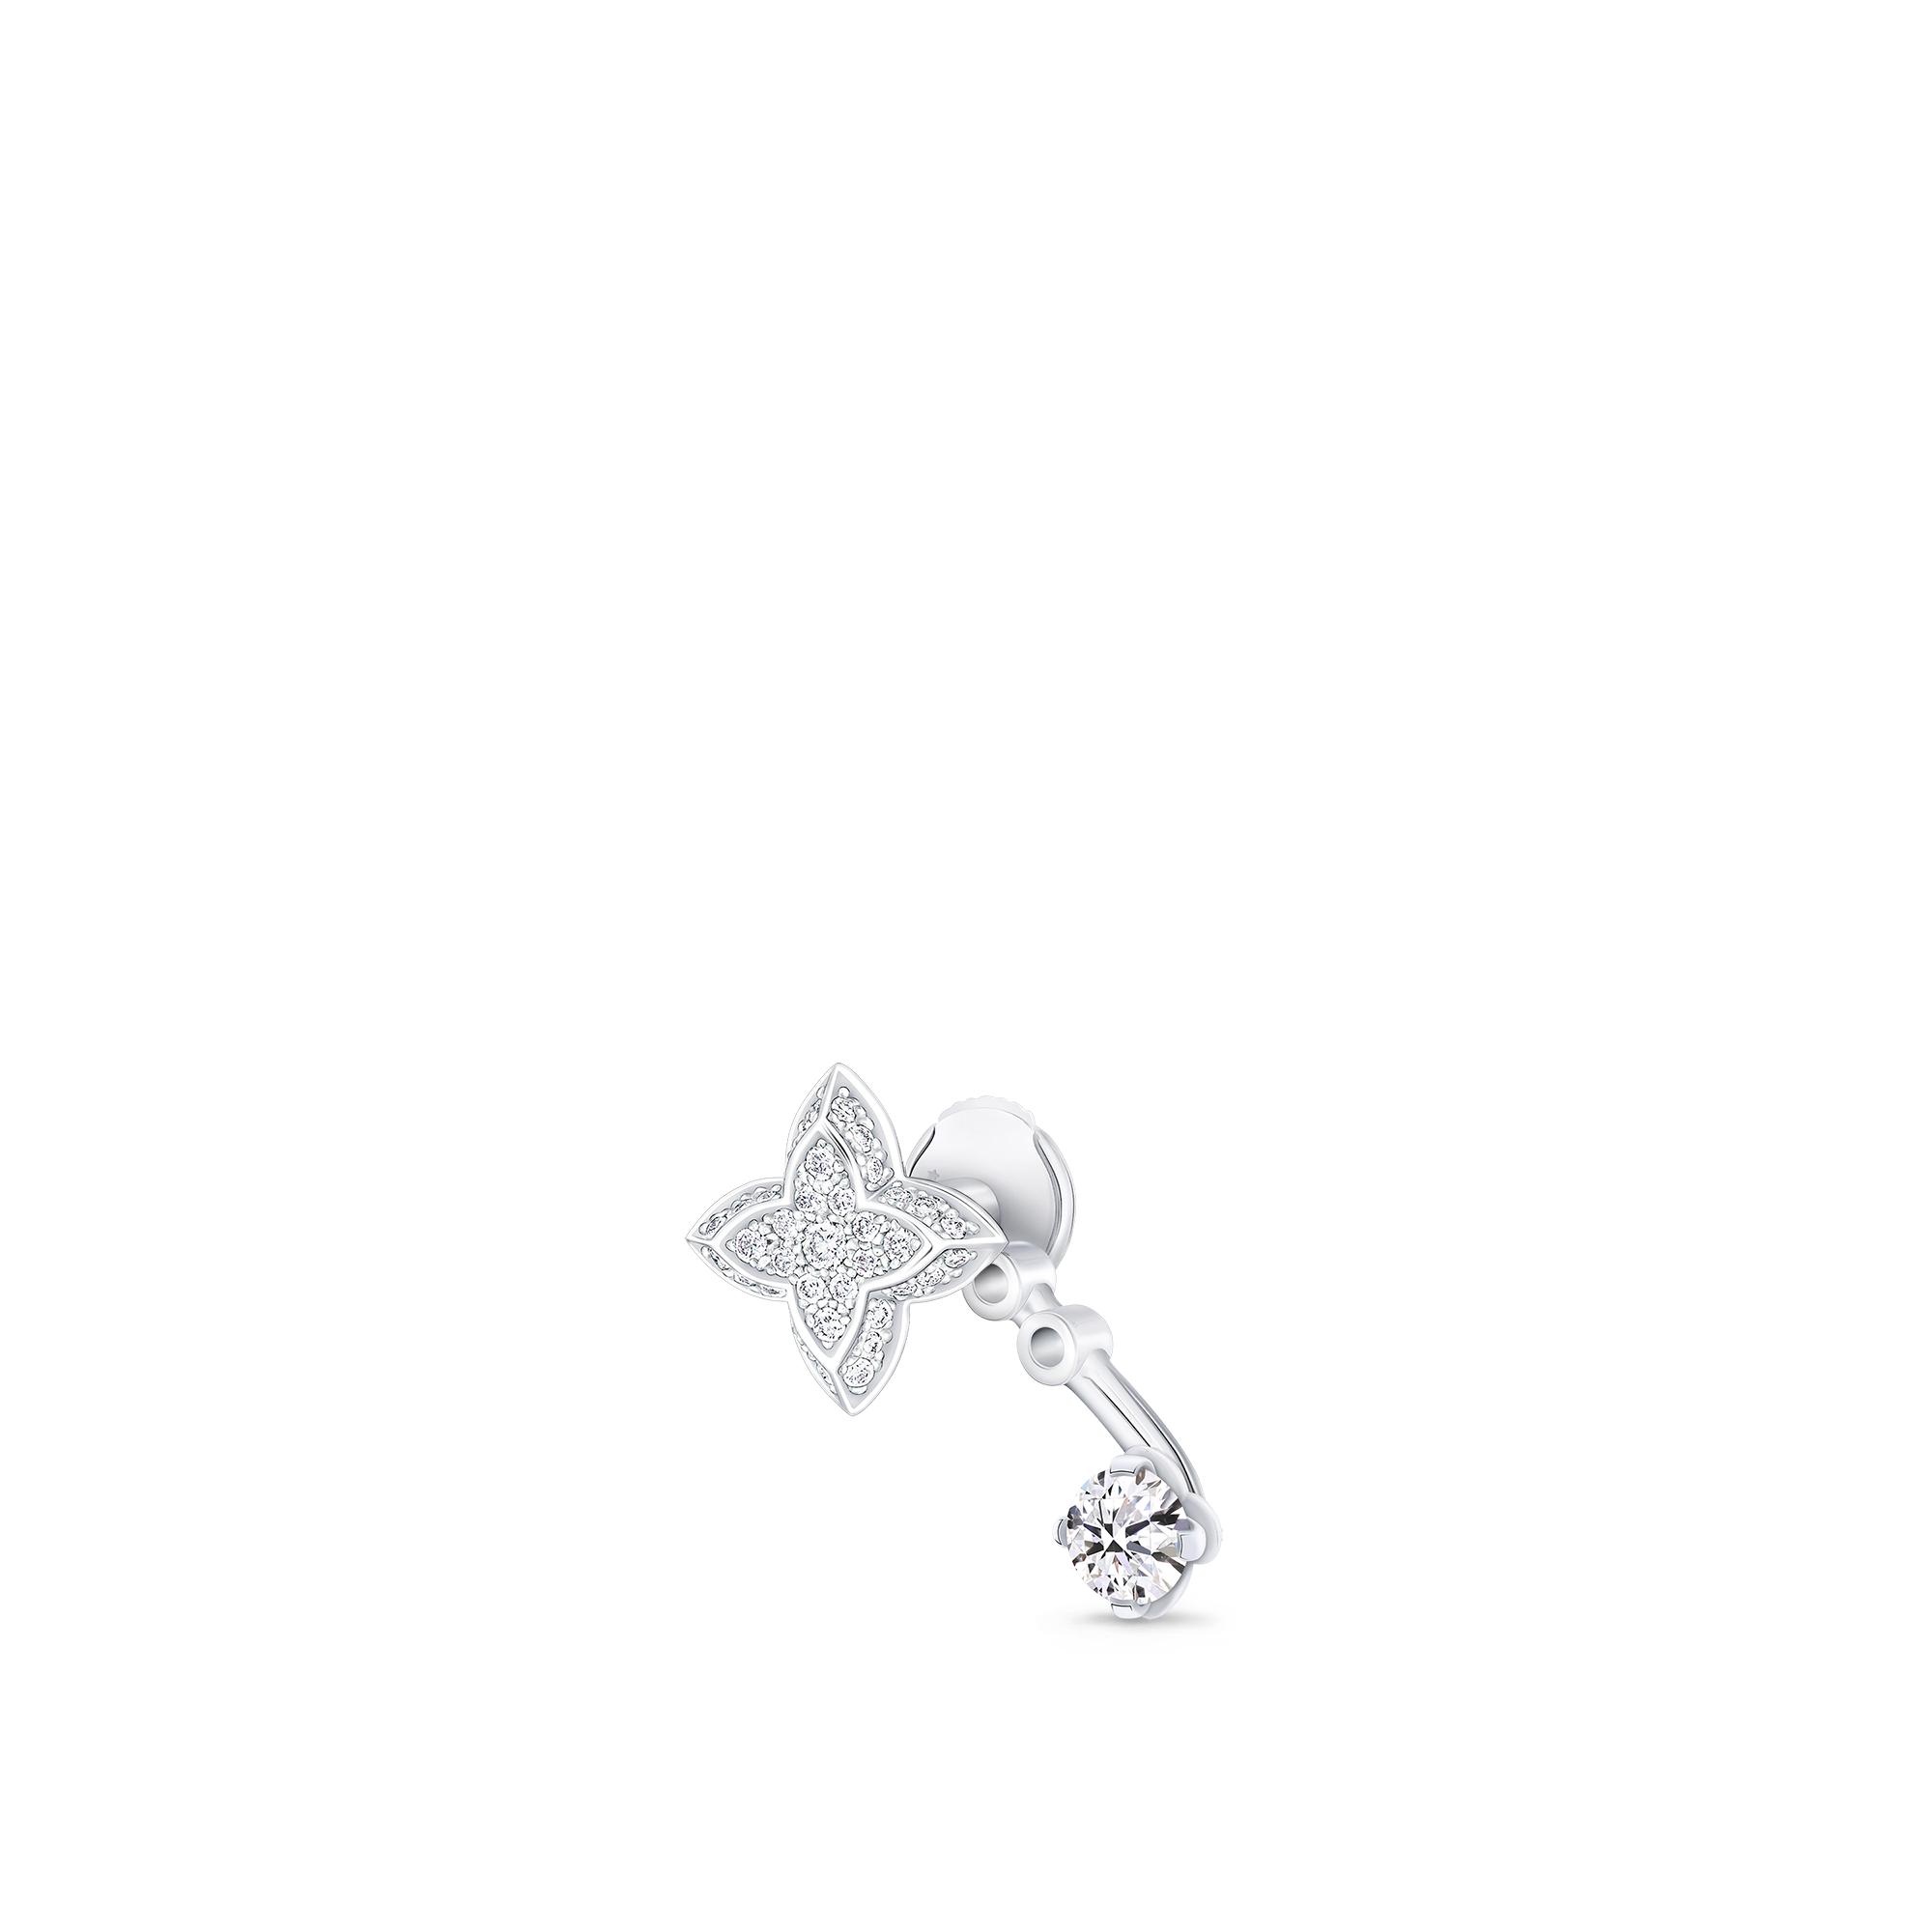 Louis Vuitton, Jewelry, Idylle Blossom Lv Ear Stud White Gold And Diamond  Per Unit